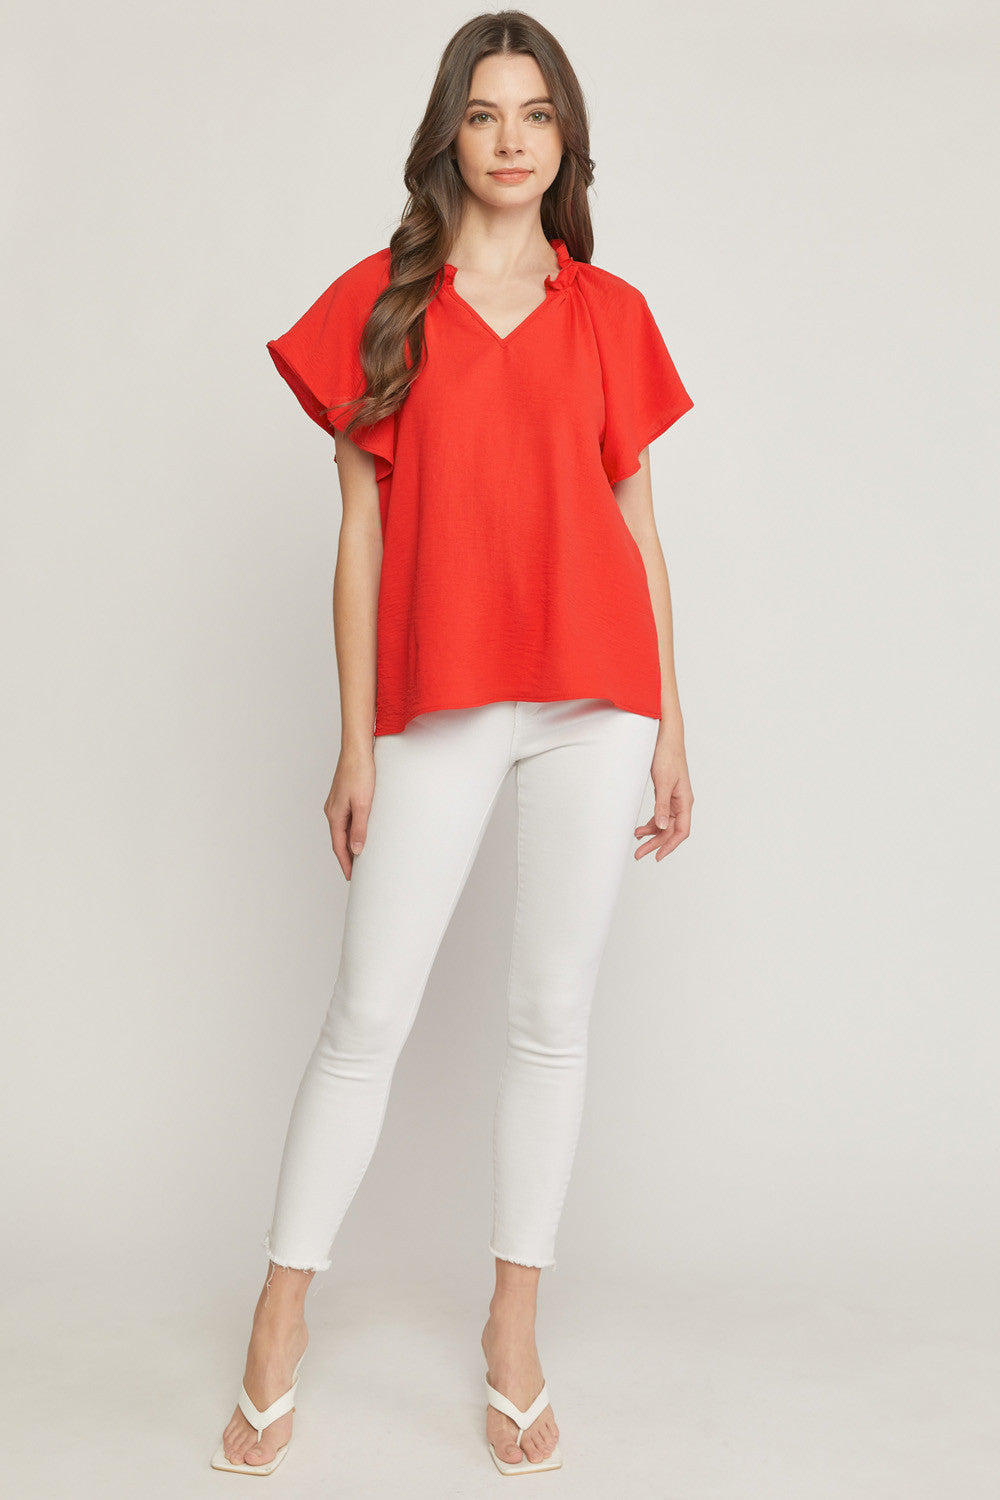 Red High Neck Sleeveless Blouse | FS Collection | SilkFred US